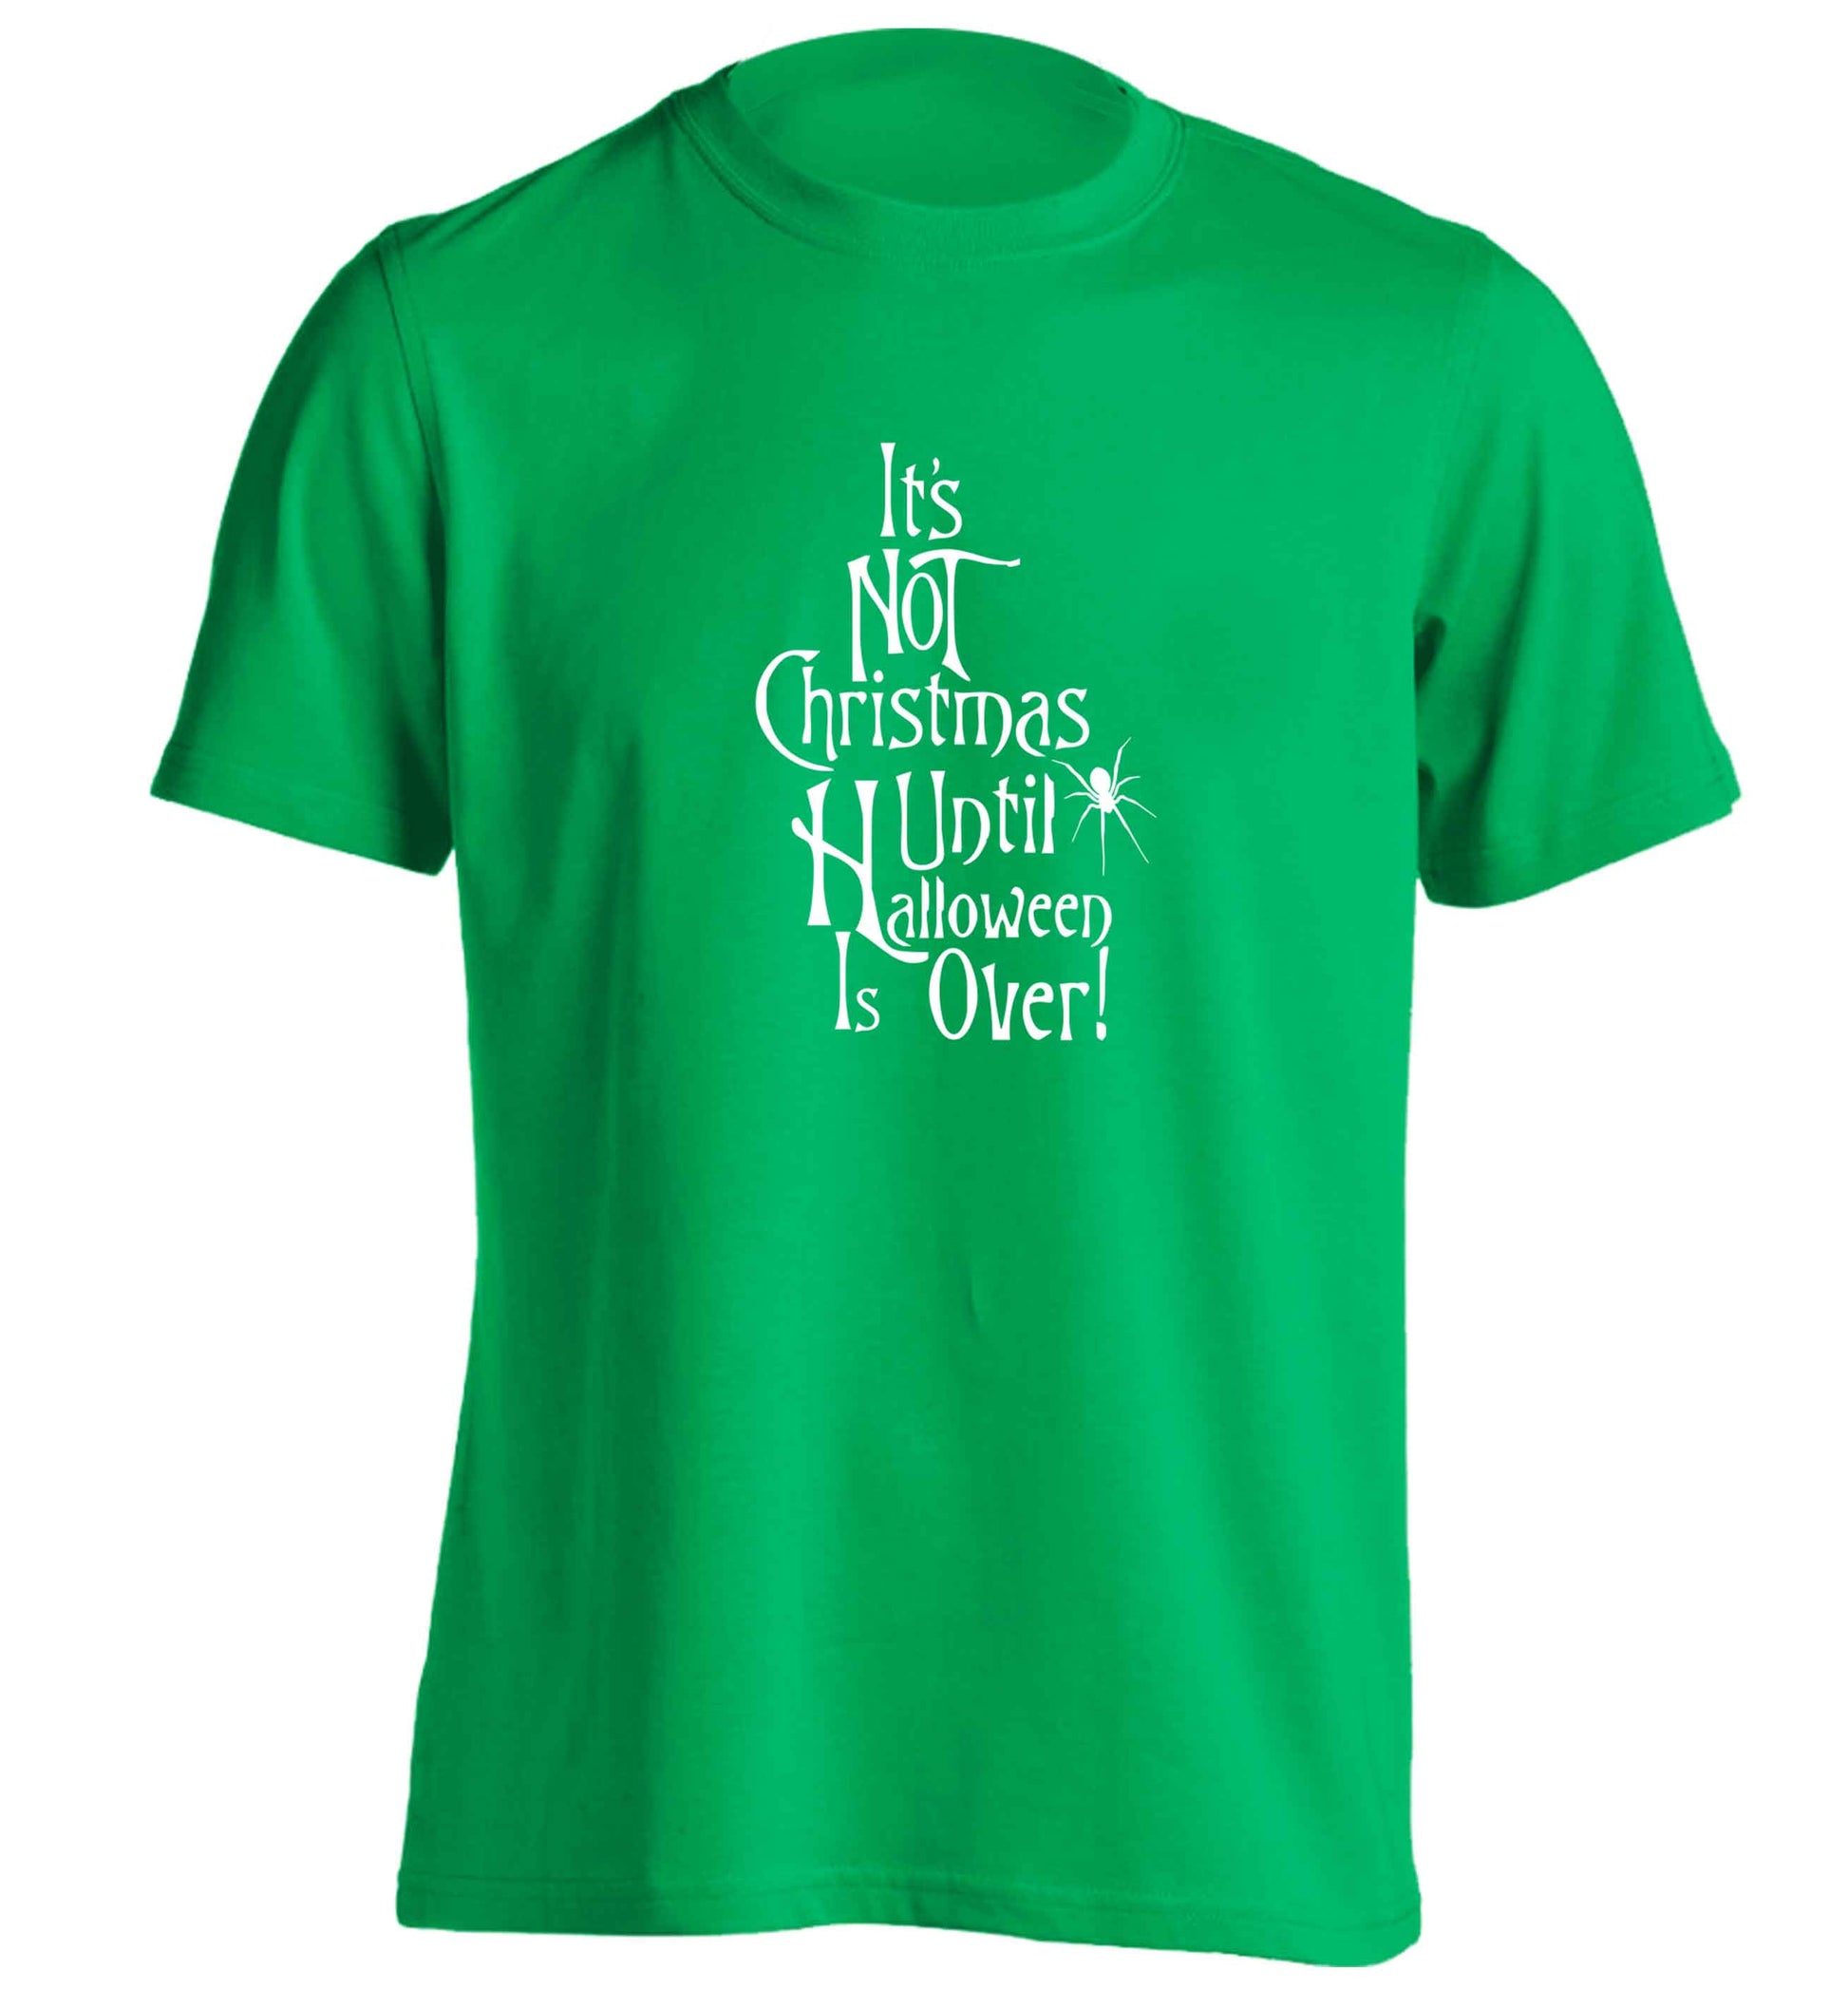 It's not Christmas until Halloween is over adults unisex green Tshirt 2XL